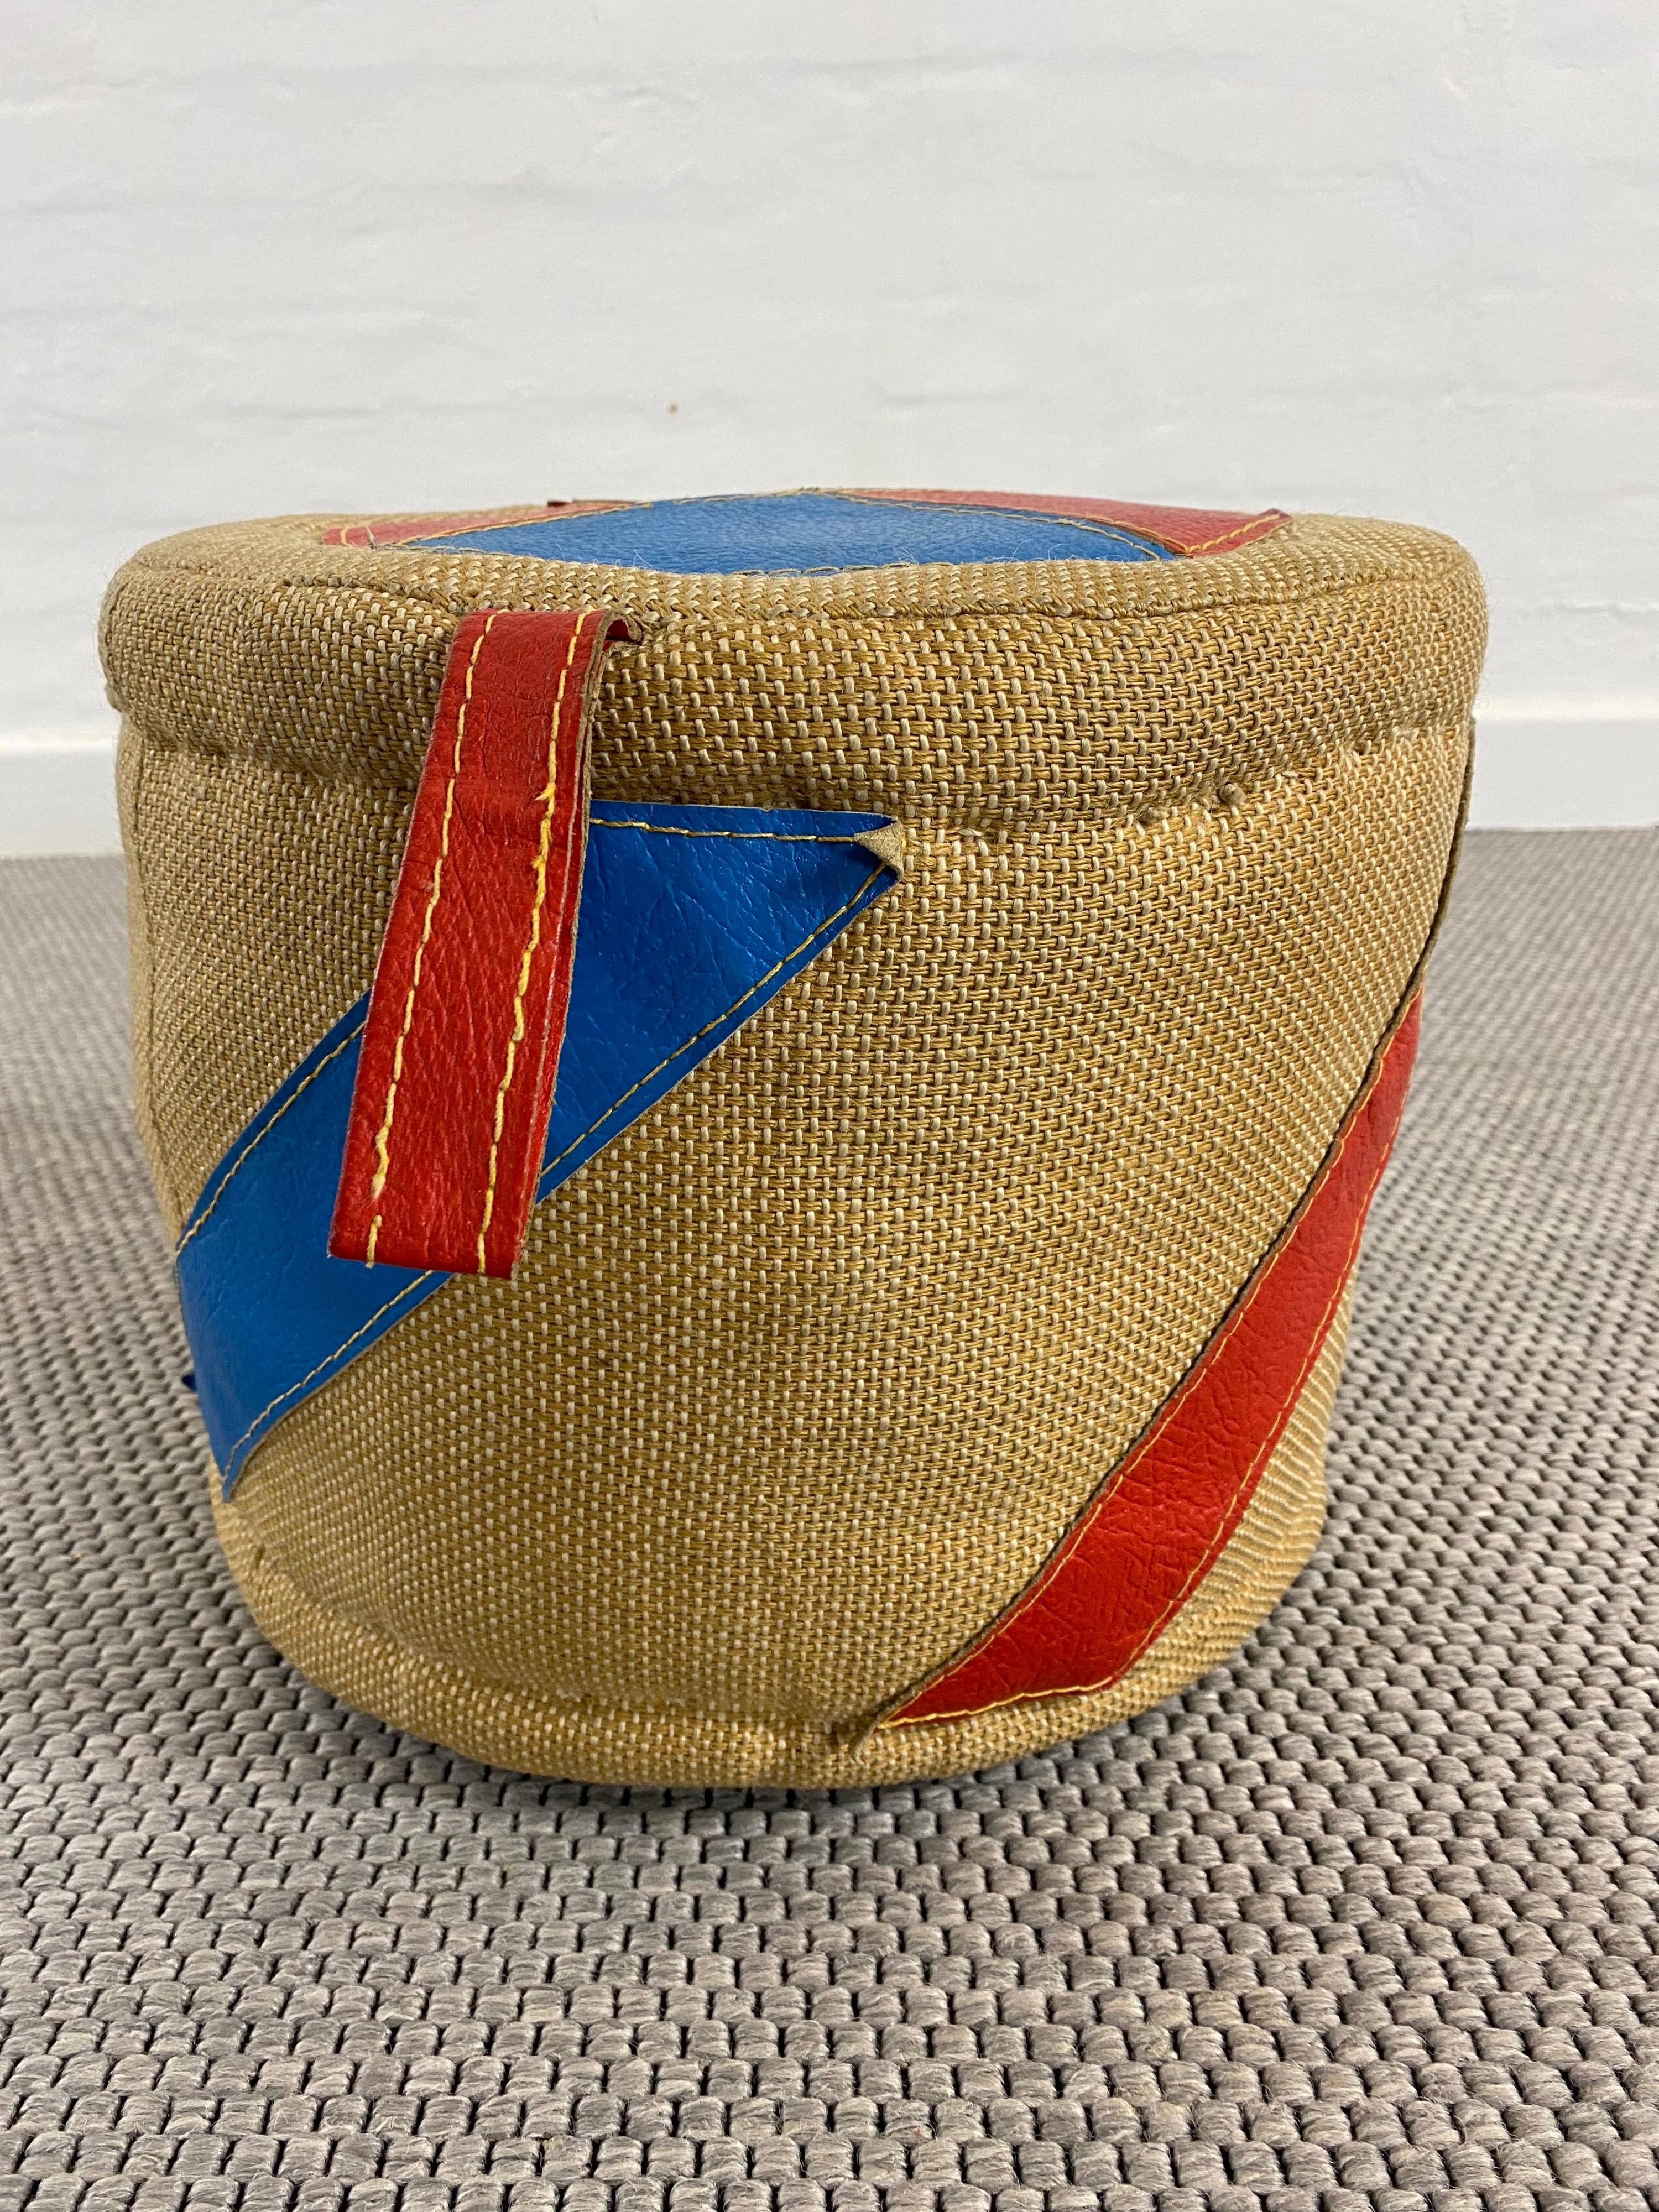 Original and Authentic therapeutic Toy for children by Renate Müller, East-Germany, GDR, circa 1973.

A Drum-shaped pouf with handles, made of jute (or so-called Rupfen) and Leather.

With its robust and natural materials this toy or pouf was a